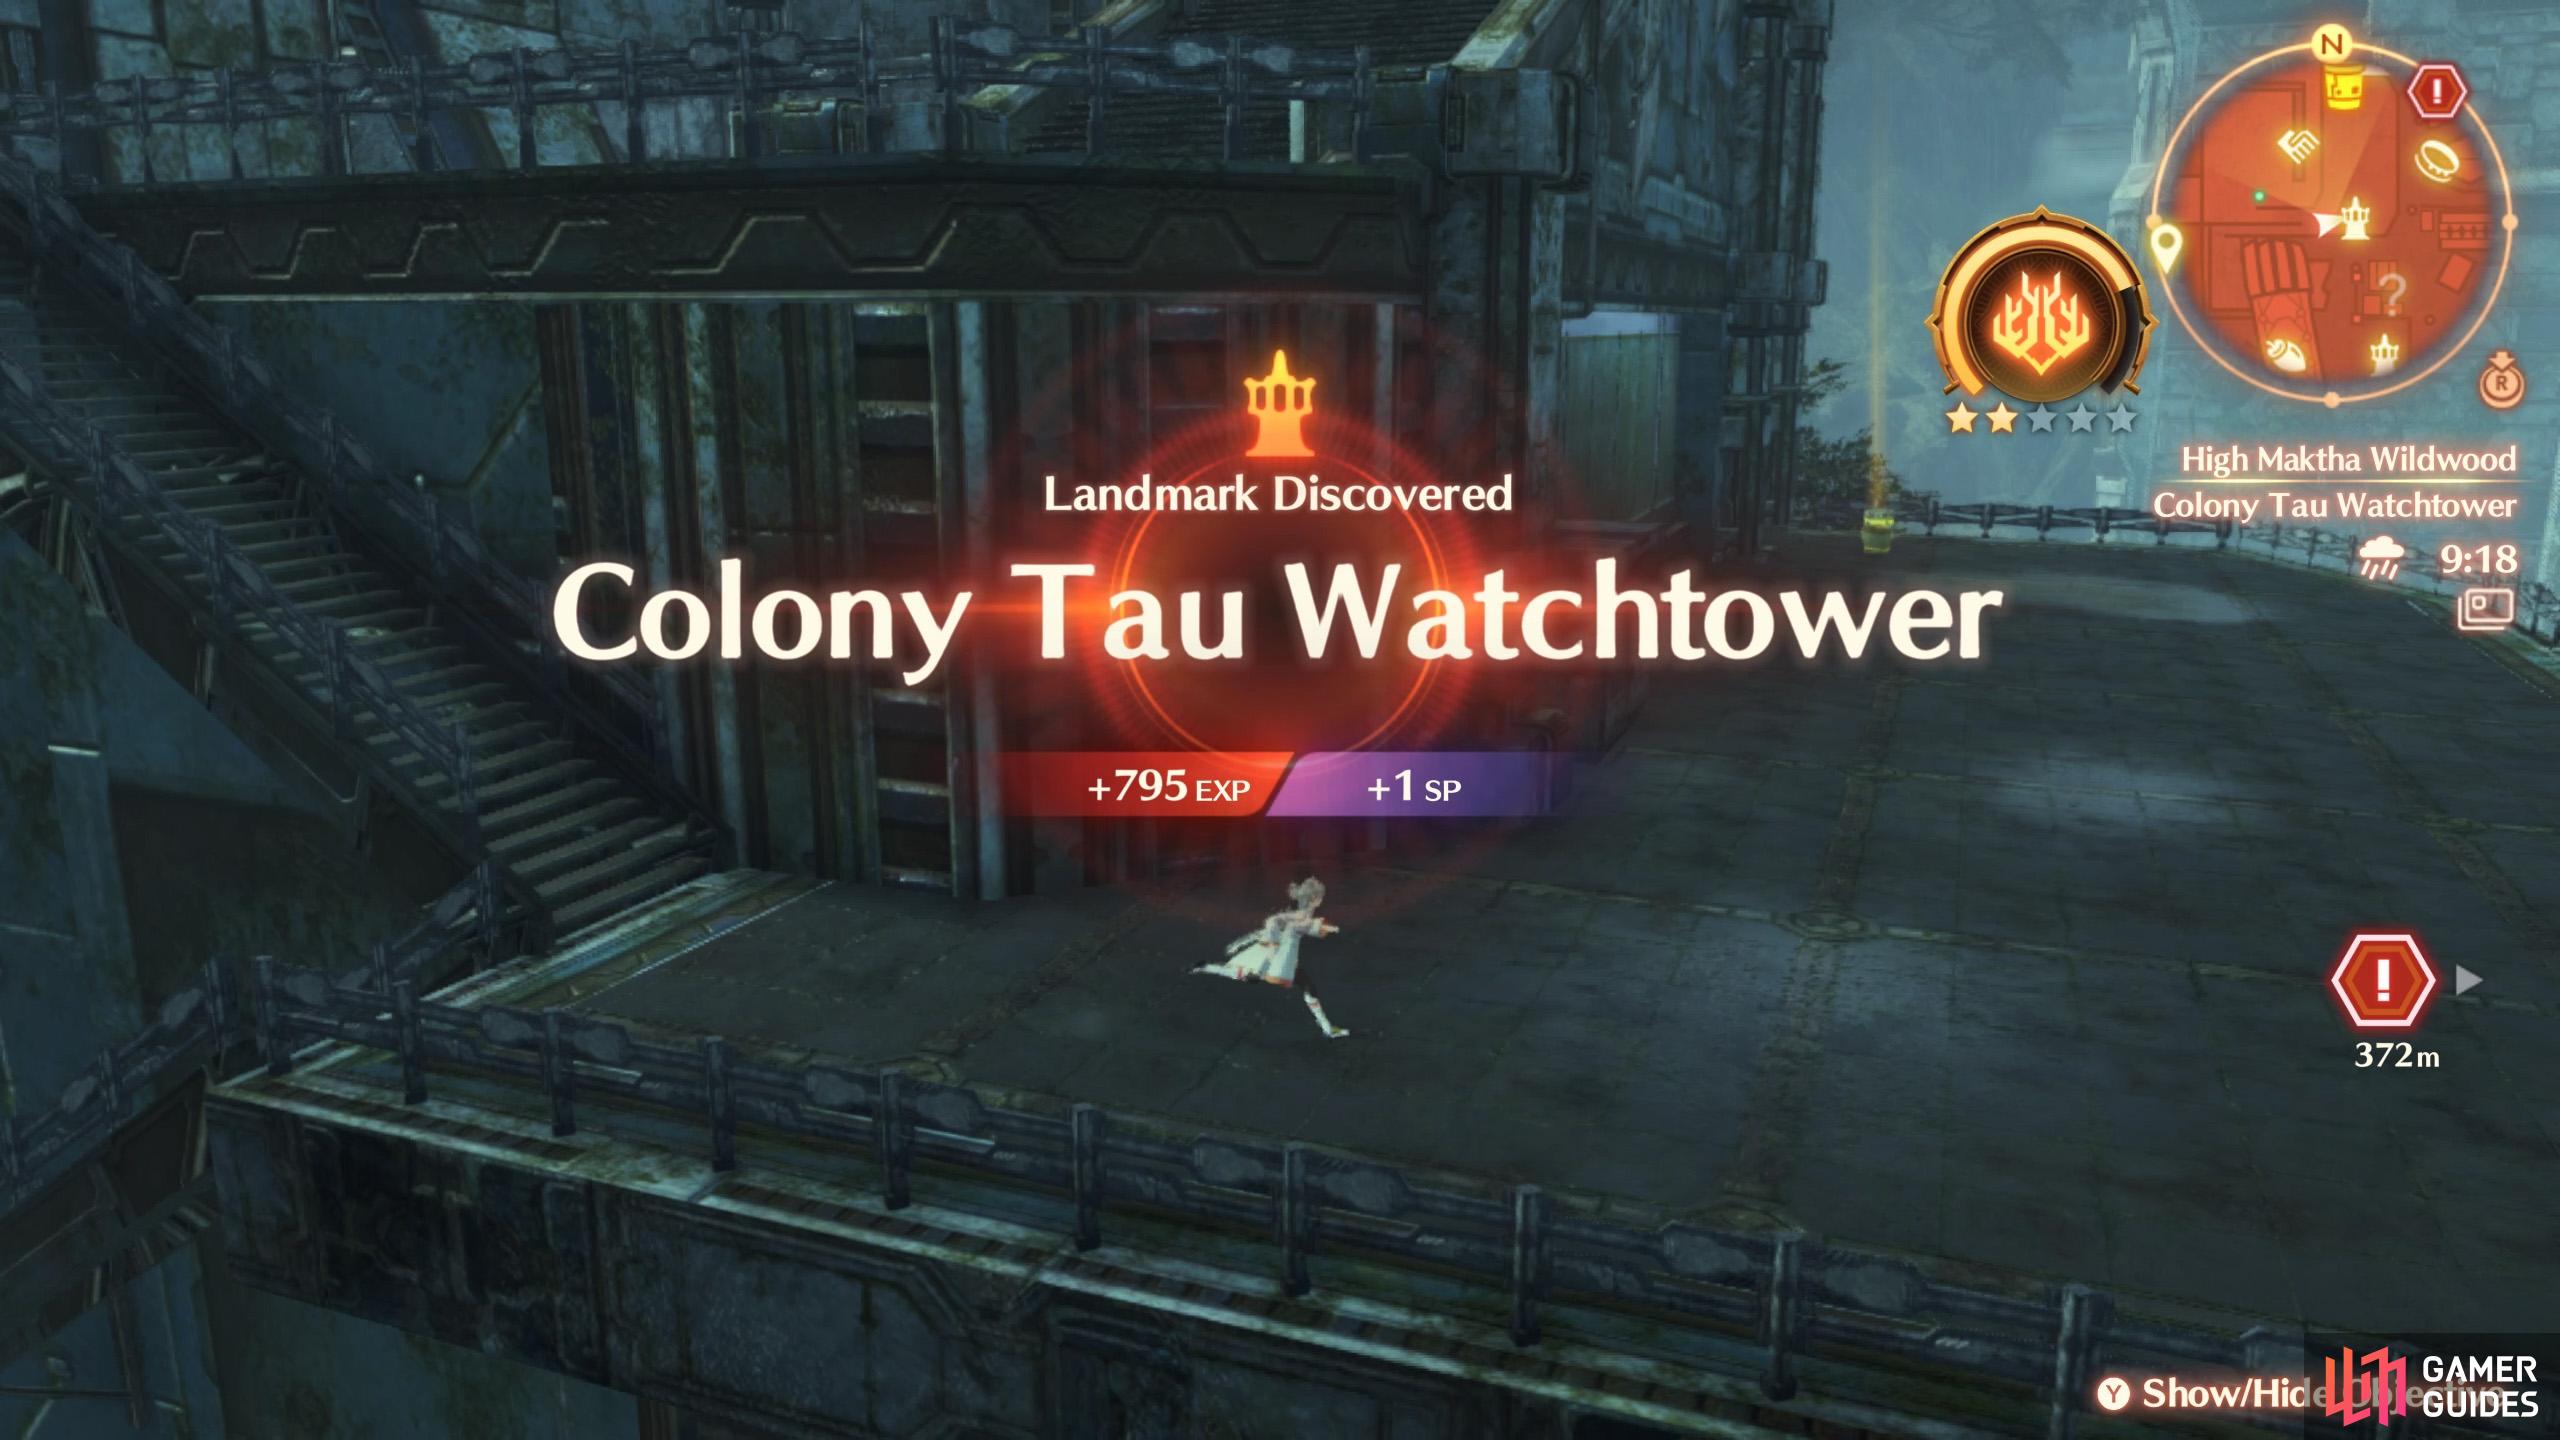 From there, you can reach the colony watchtower and a nearby elevator.